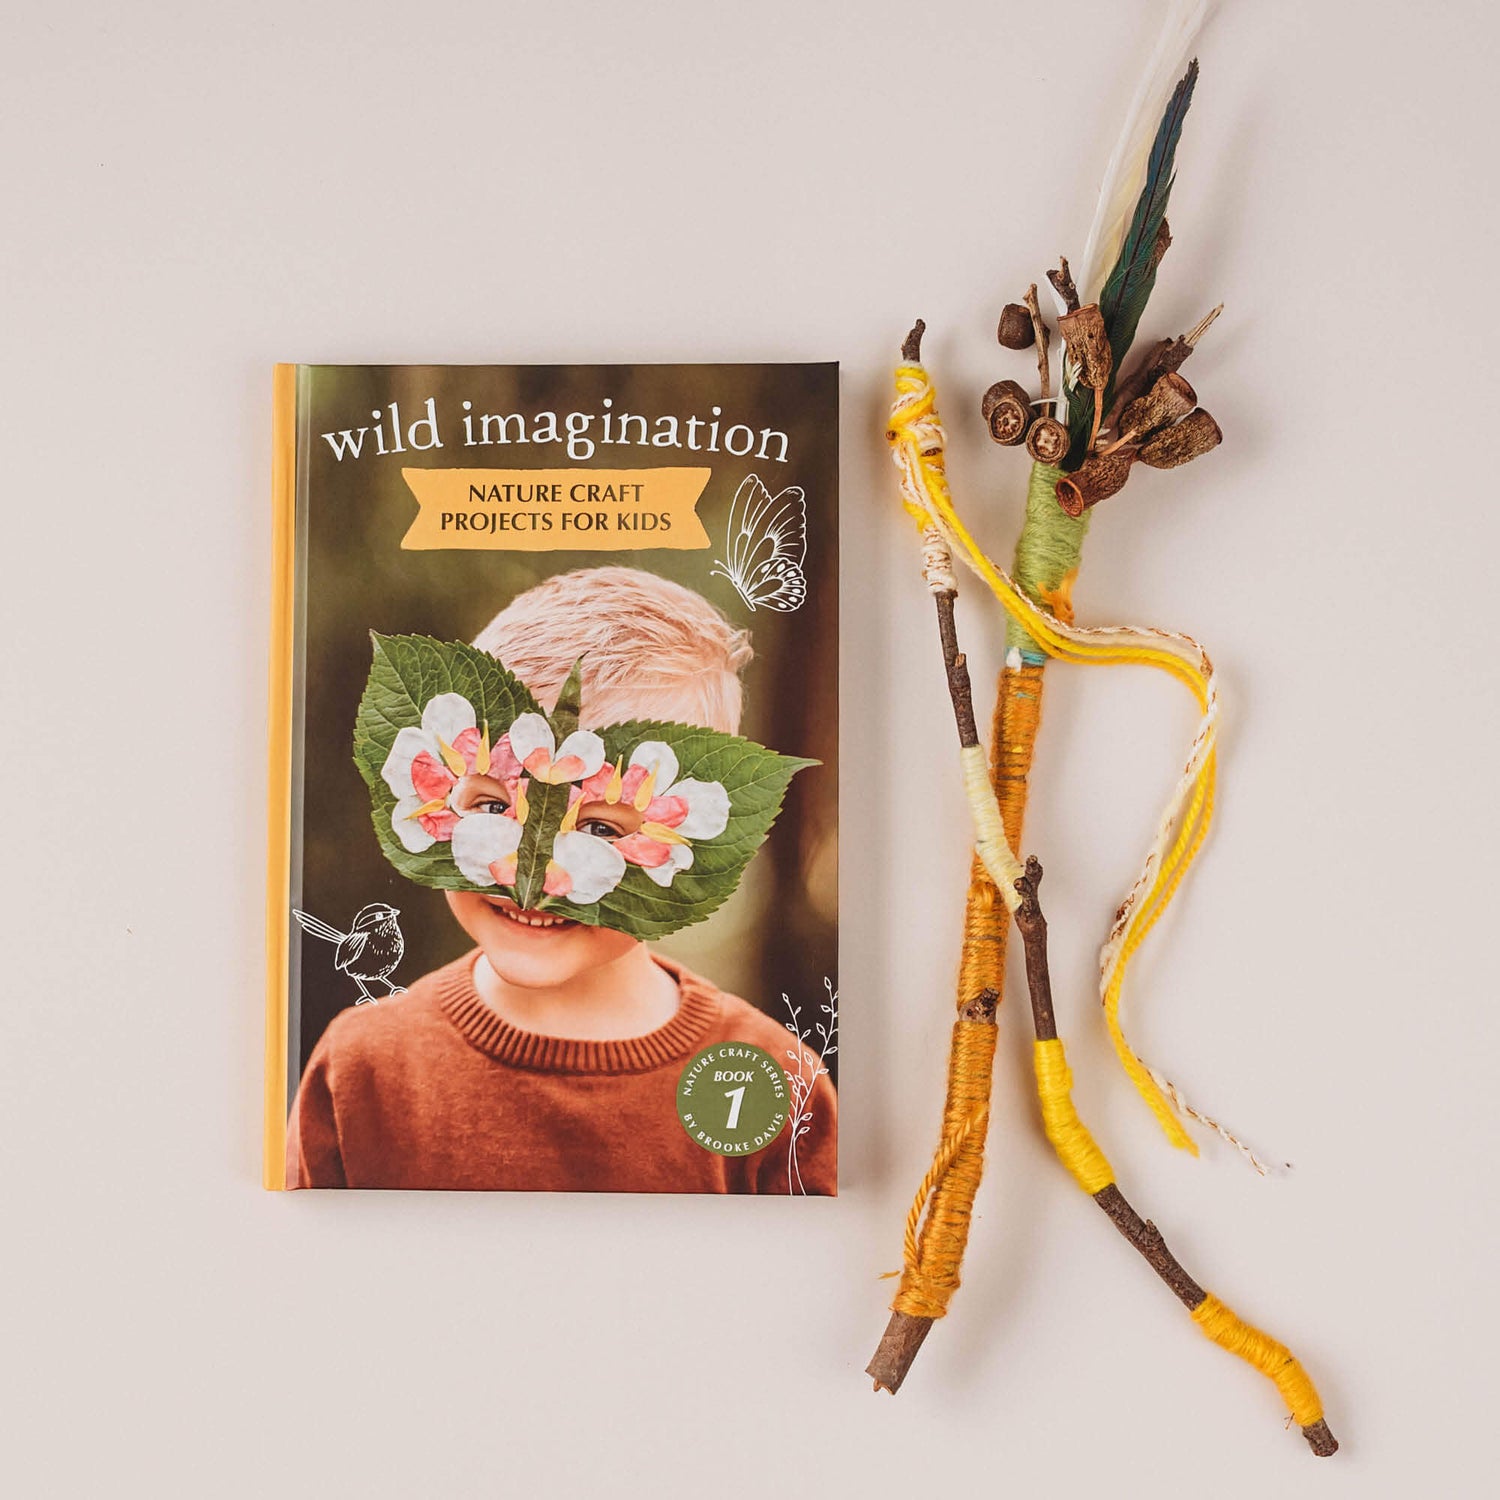 Wild Imagination featured in Nature Craft Starter Pack from Your Wild Books includes Wild Imagination book, Wild Child book, paint pens in classic colours and an opinel beginners whittling knife. Save 20%